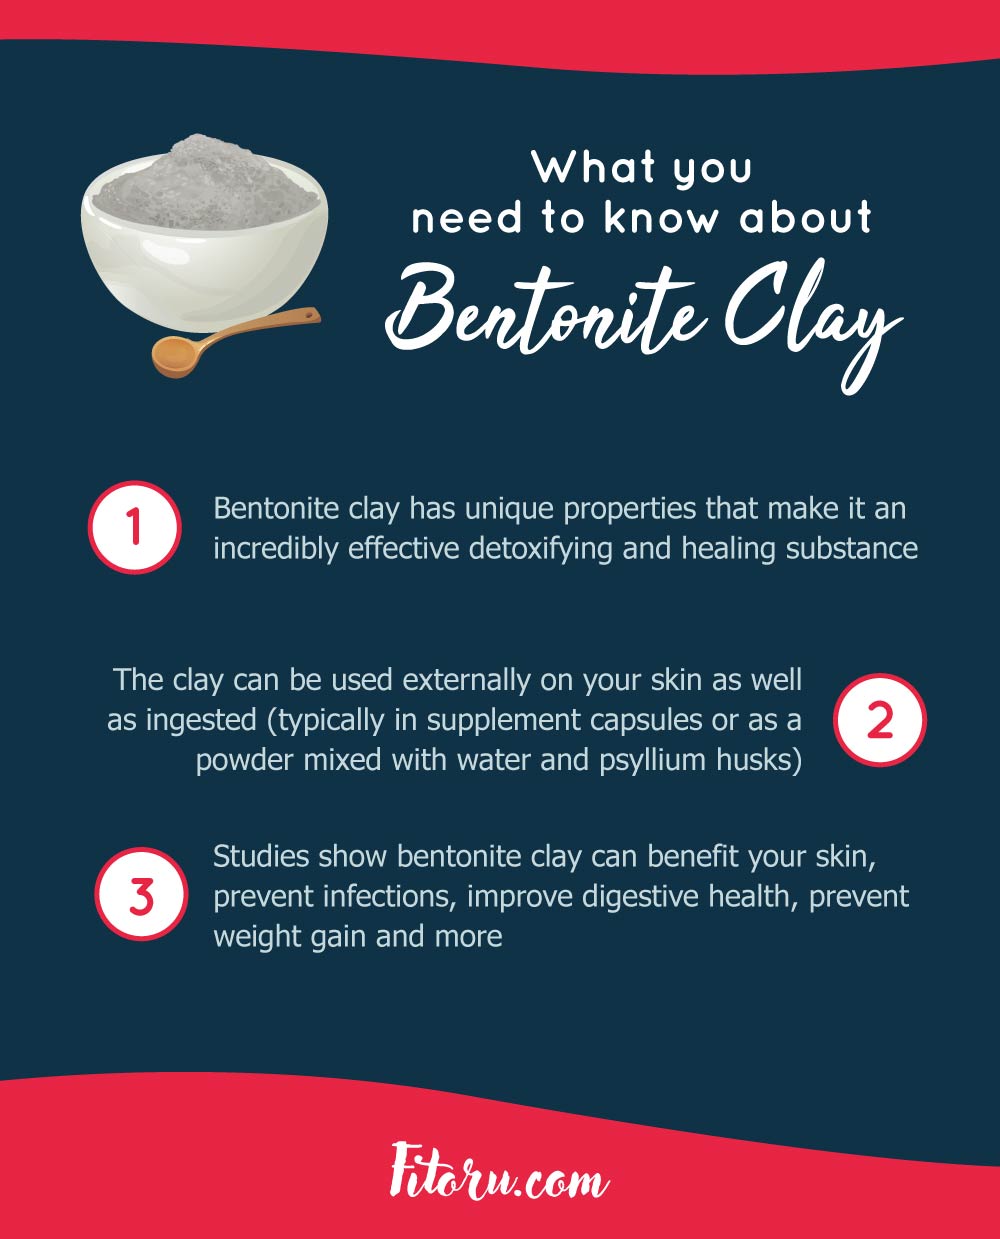 Here is what you need to know about bentonite clay.